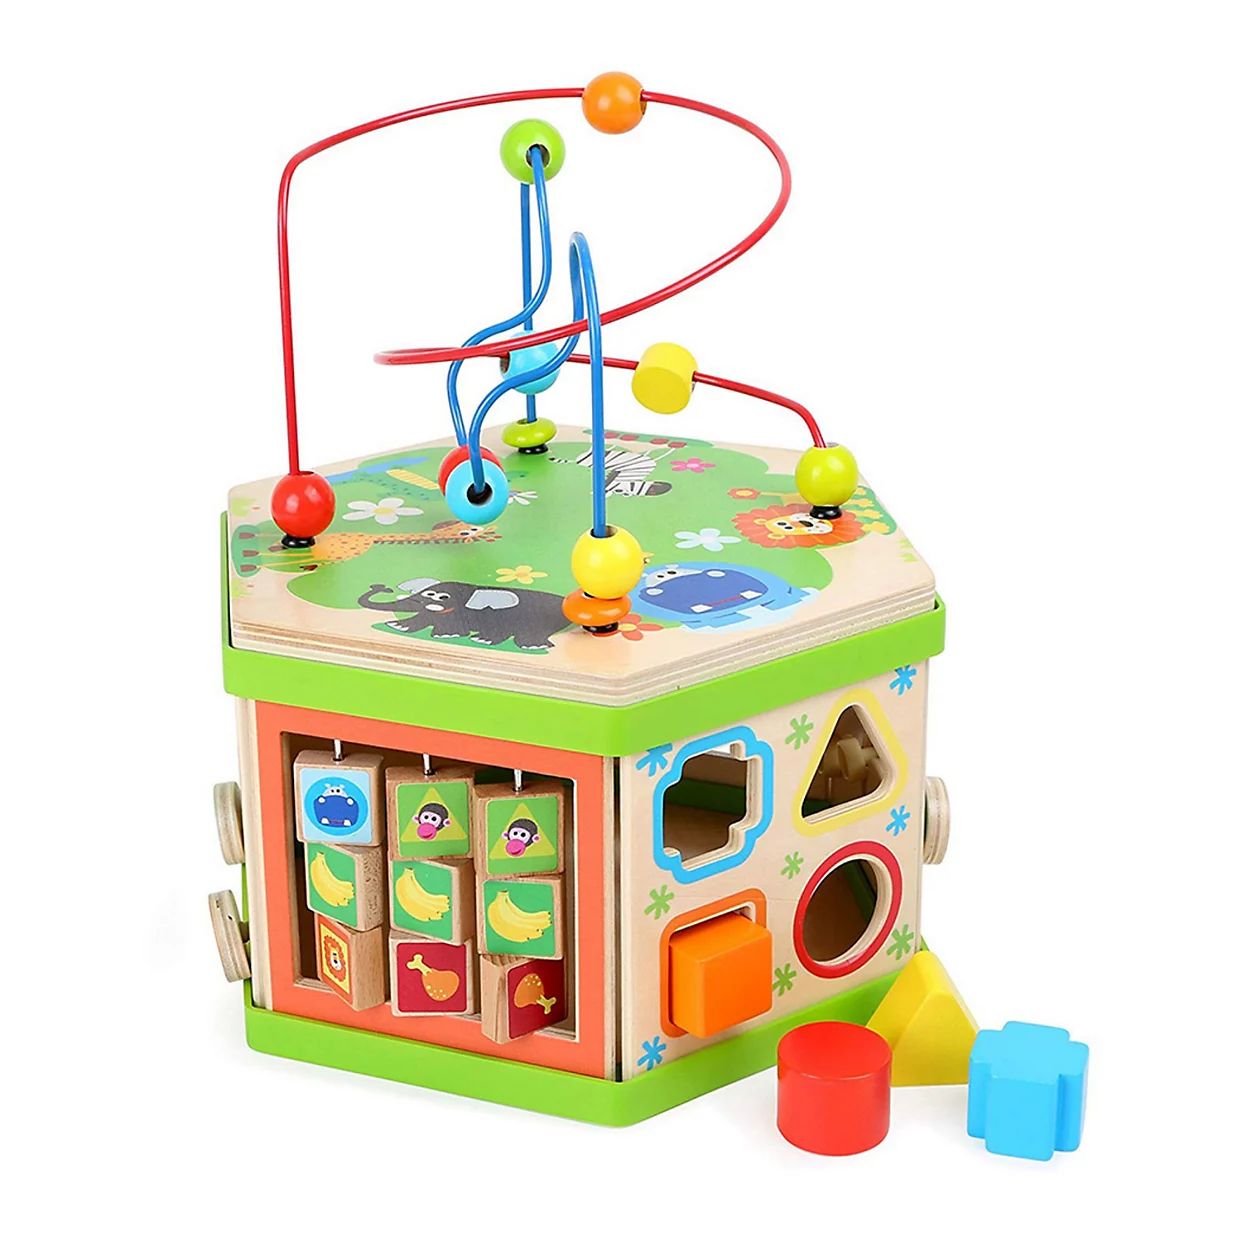 Small Foot Wooden Toys 7-Sided Safari Theme Activity Cube Center | Kohl's